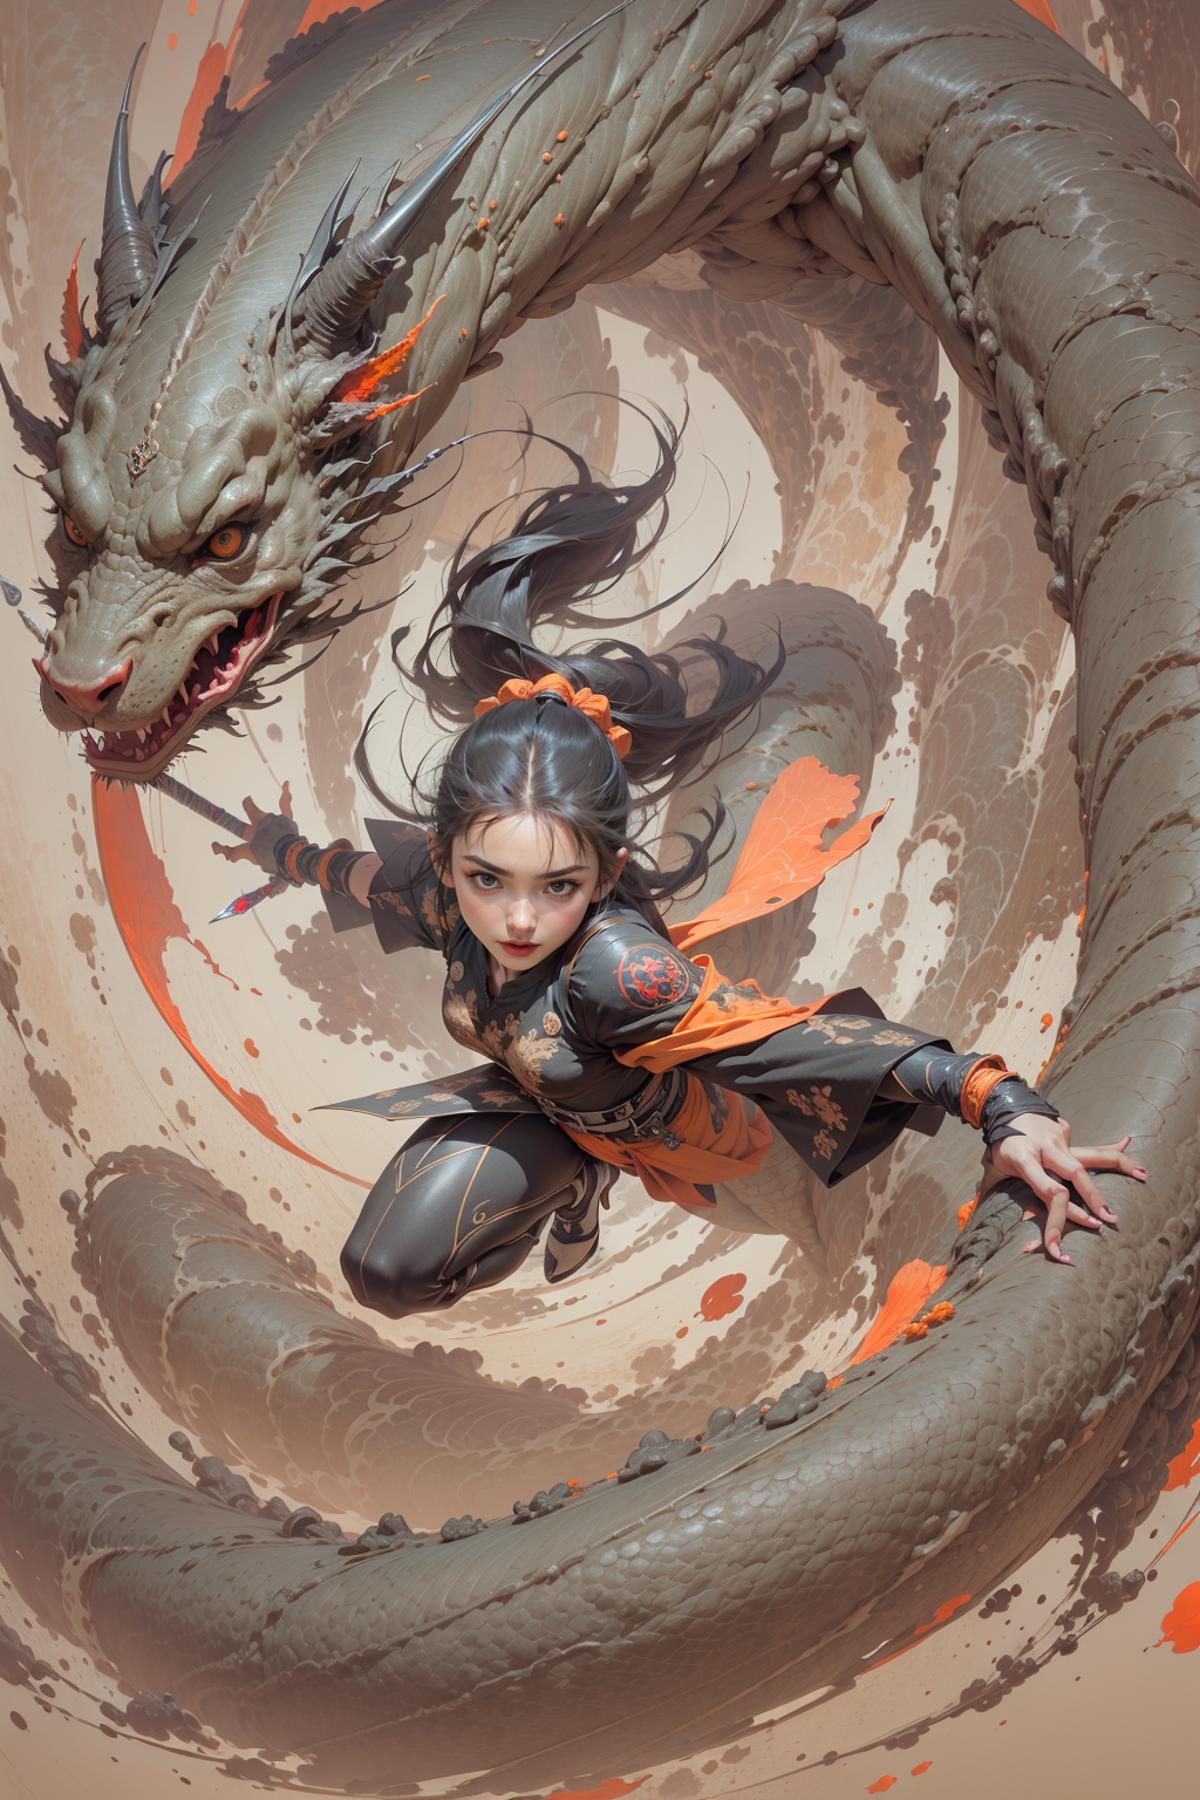 A woman, possibly an anime character, is fighting a dragon in a surreal scene.